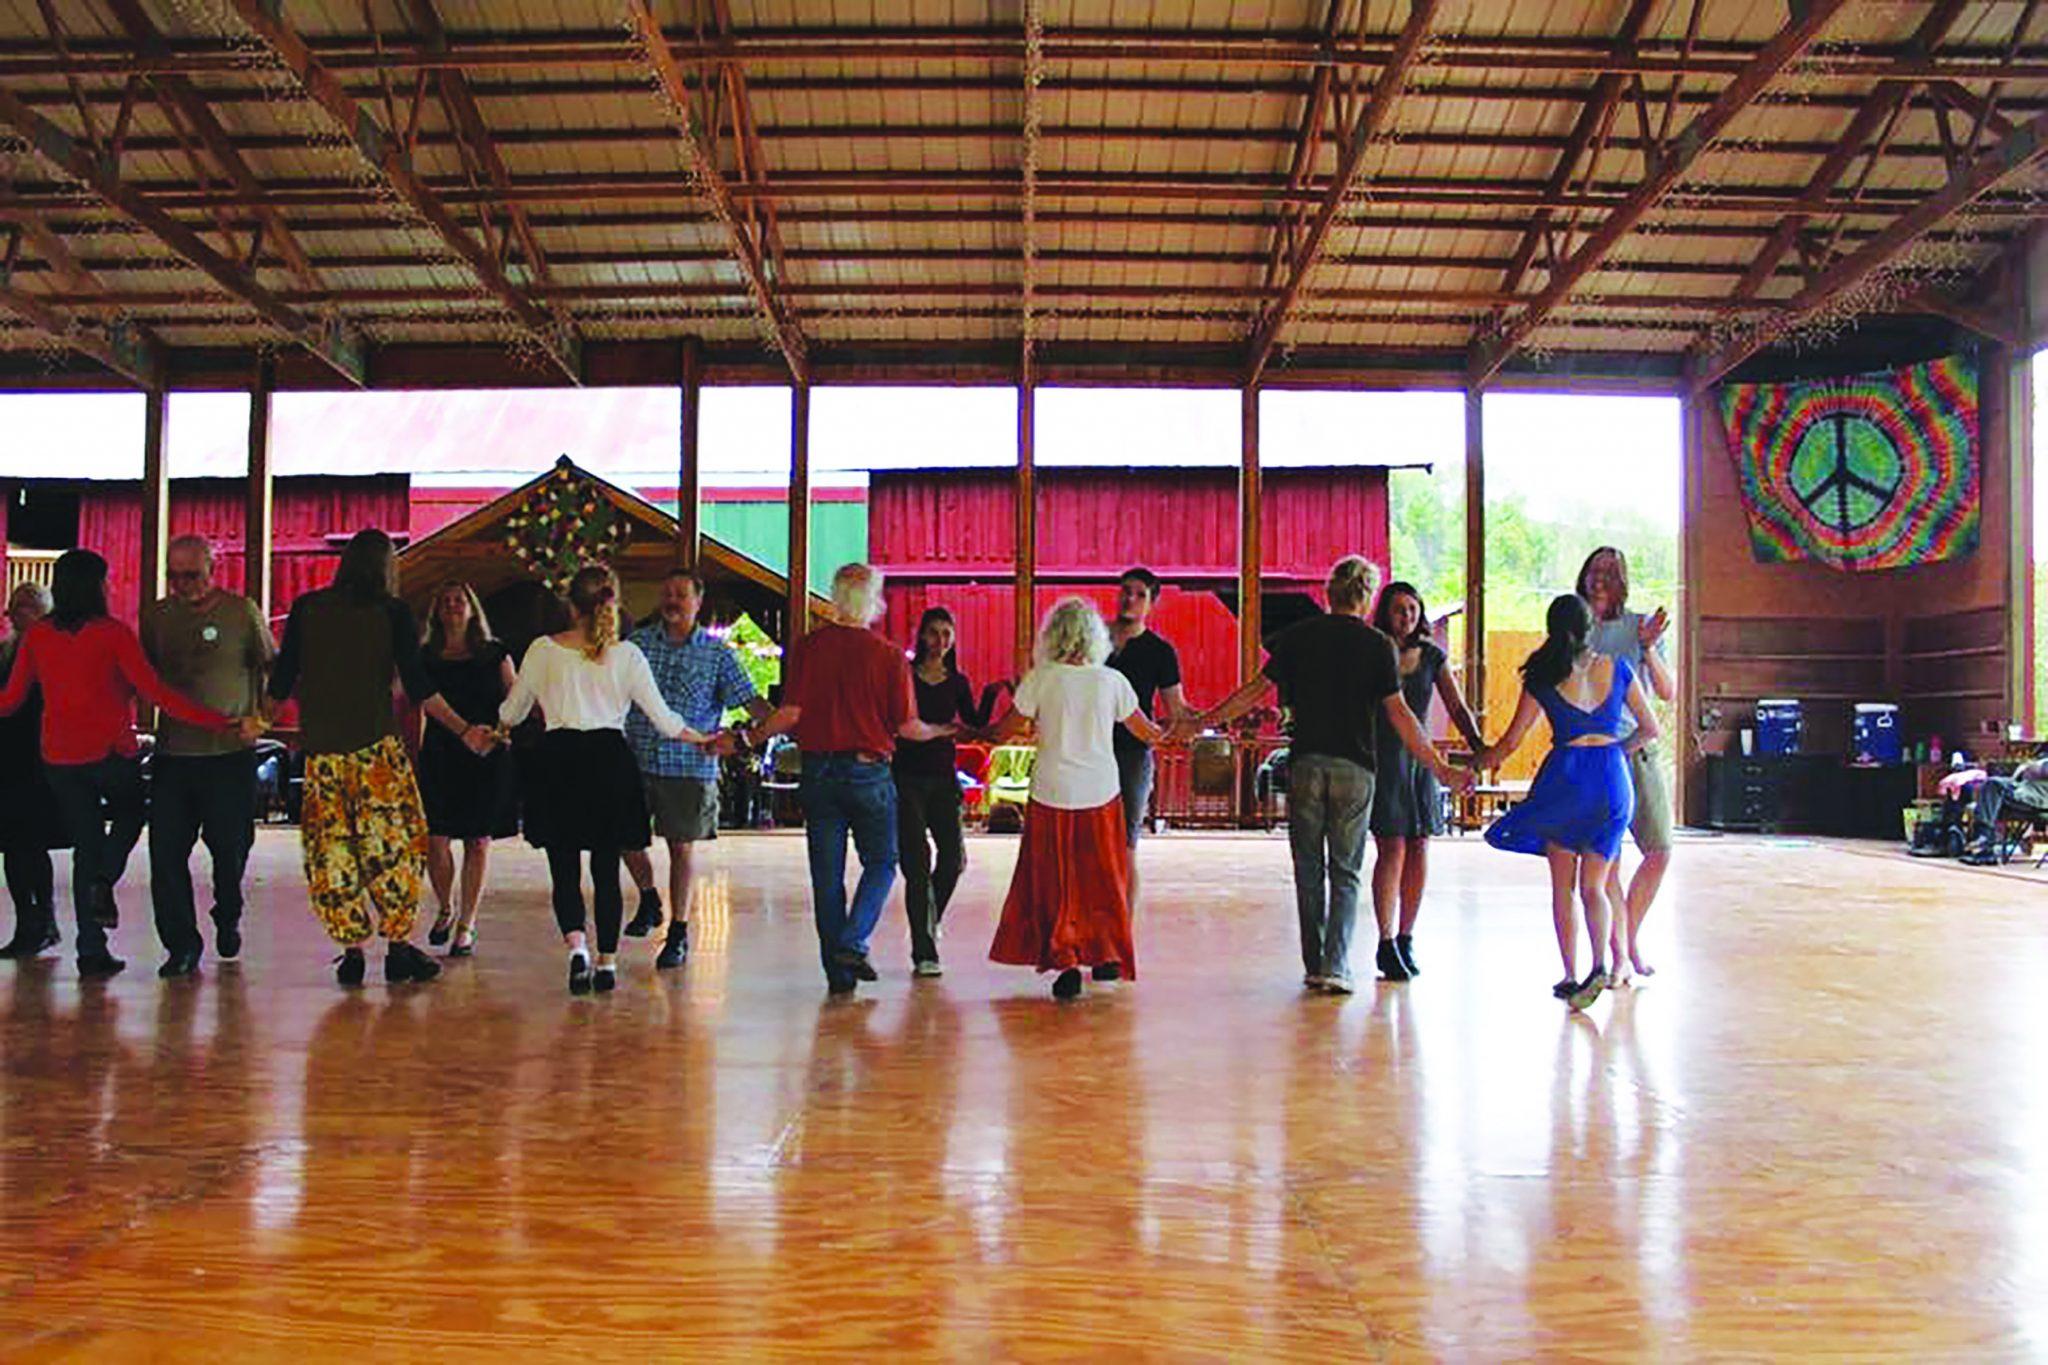 People dancing in two lines facing eachother at a 12-hour contra dance called Boonedoggle. The event was hosted by the Boone Contra Dancers on October 8.